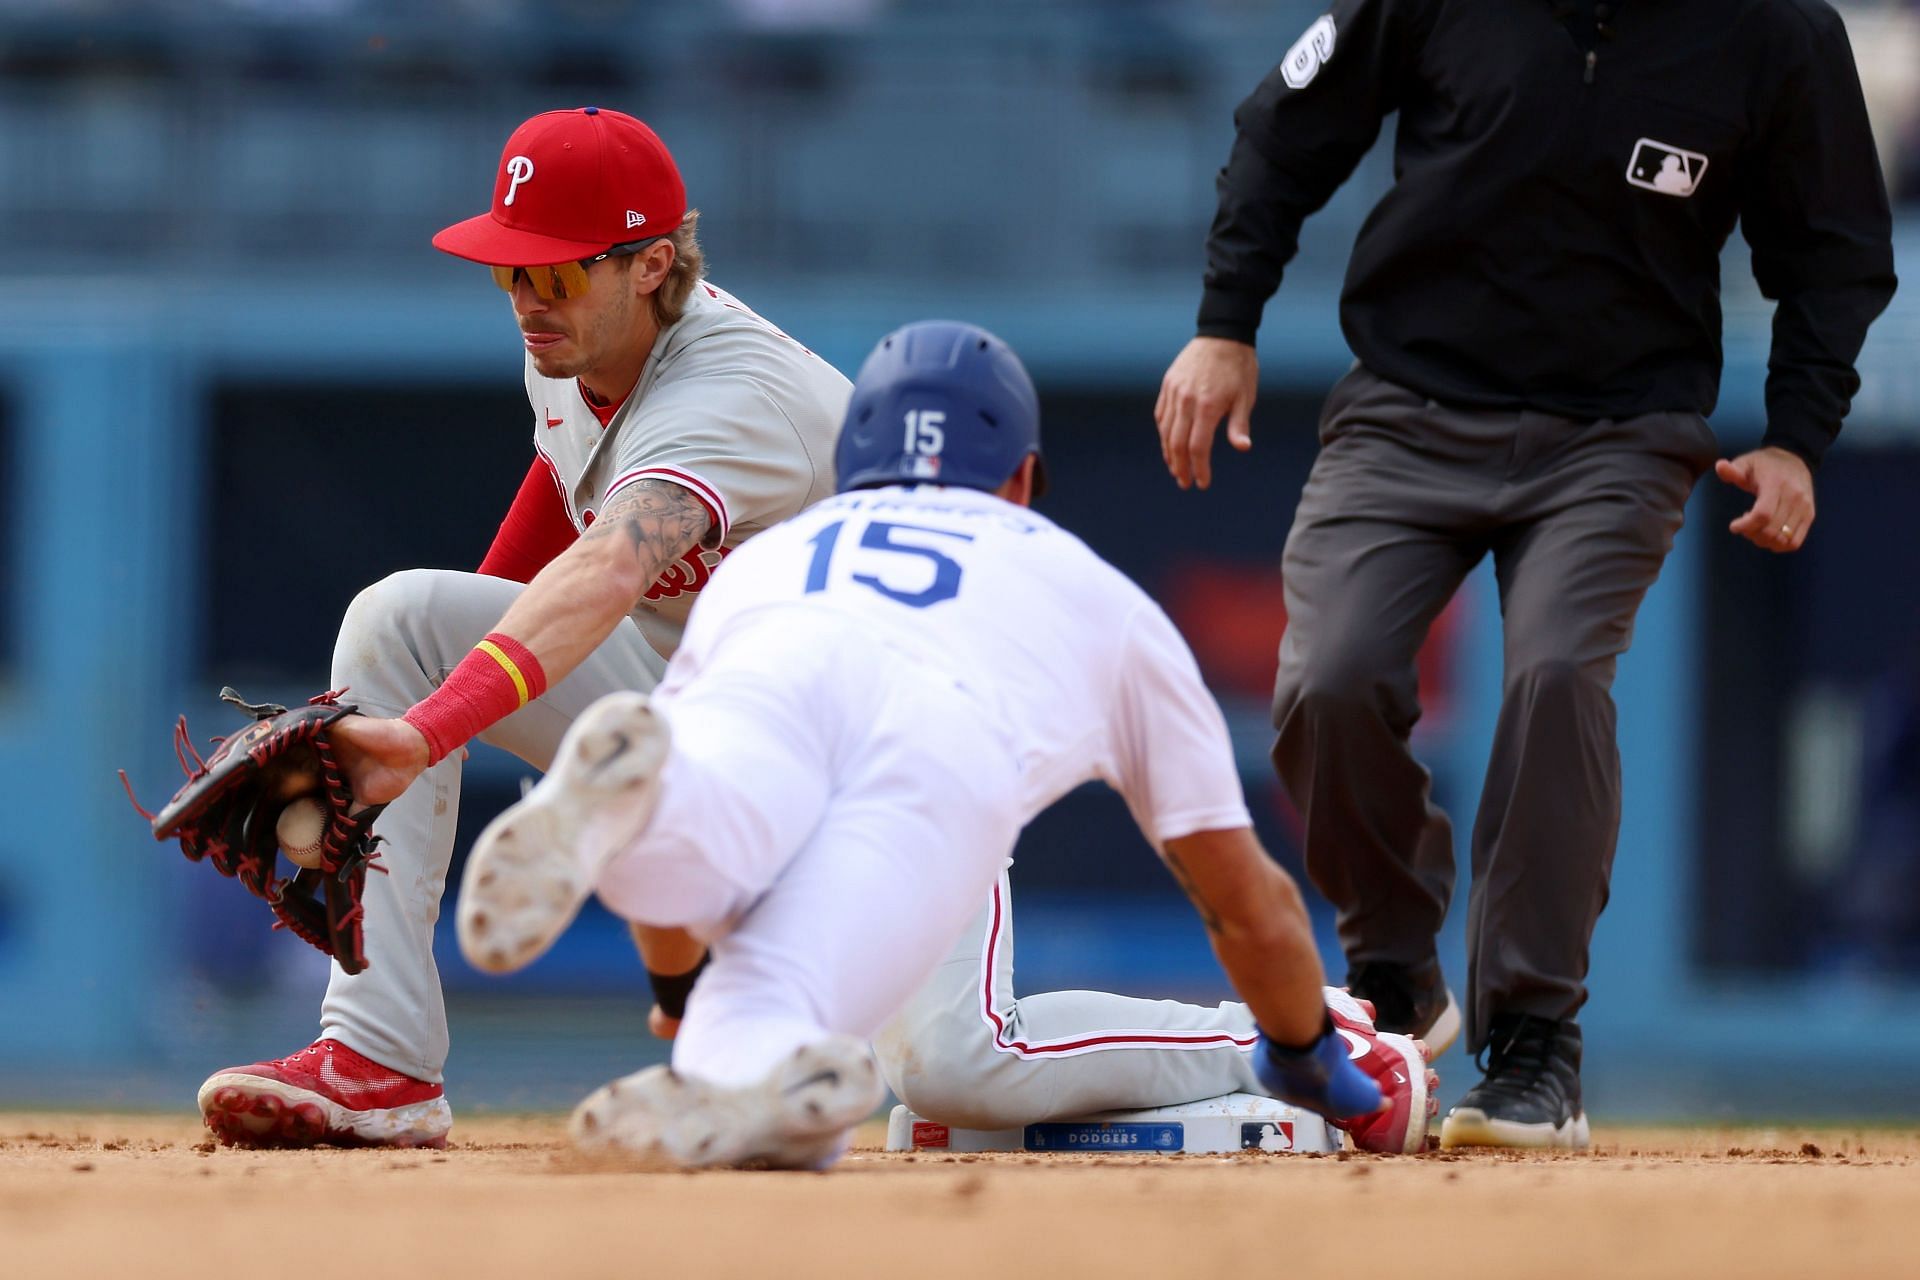 Bryson Stott #5 of the Philadelphia Phillies gets the out at second base on Austin Barnes #15 of the Los Angeles Dodgers